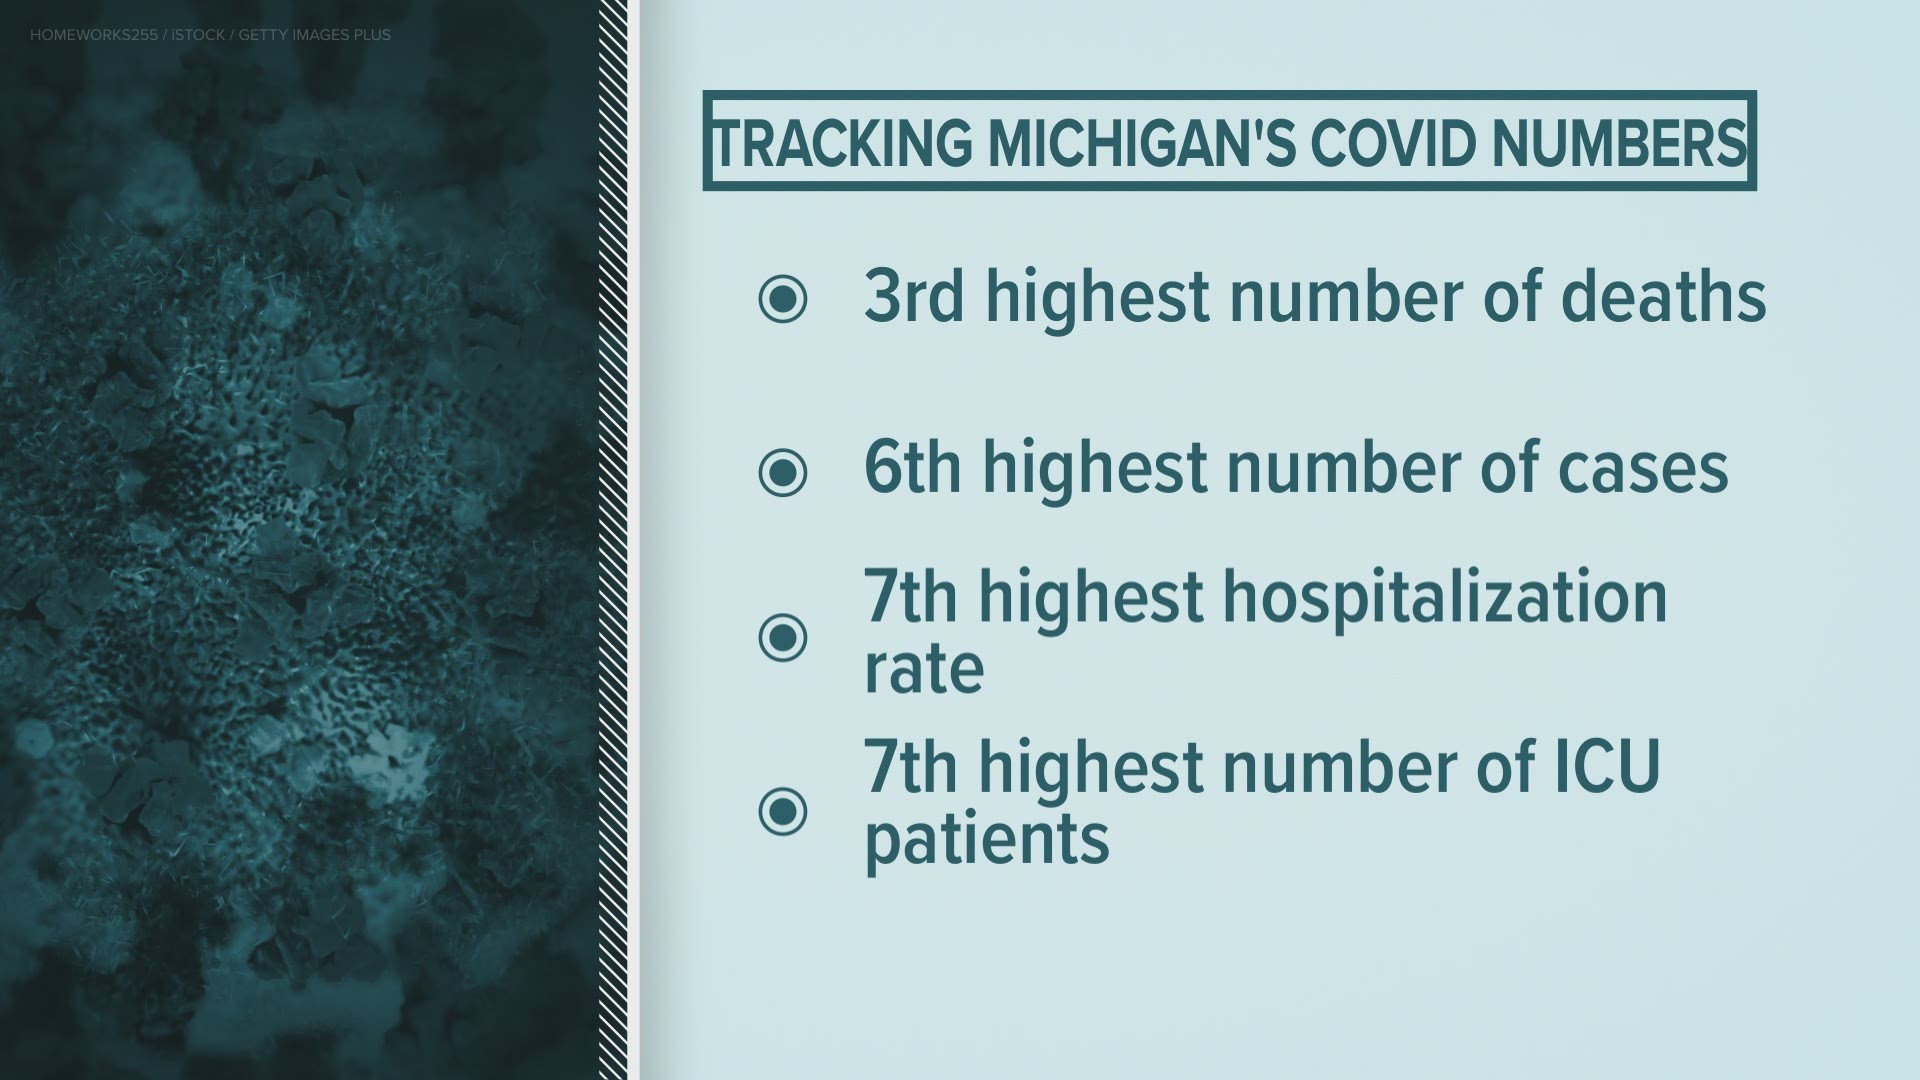 Michigan ranks 3rd for highest number of COVID-19 deaths